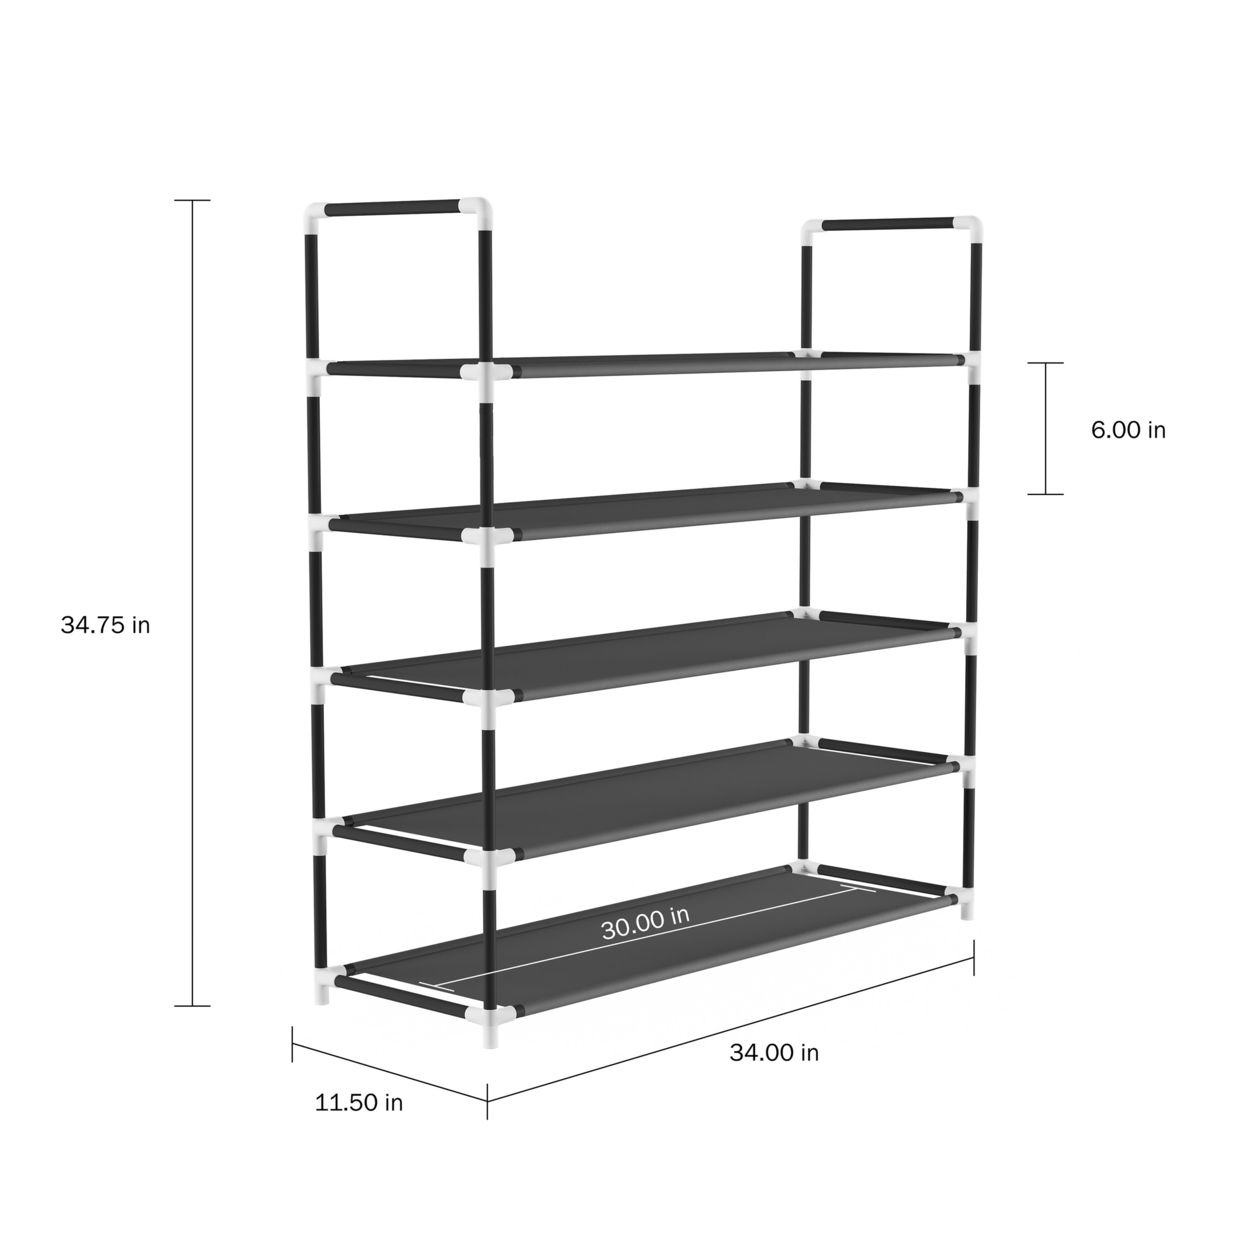 Shoe Rack-5 Tier Storage For Sneakers, Heels, Flats, Accessories, And More-Space Saving Organization